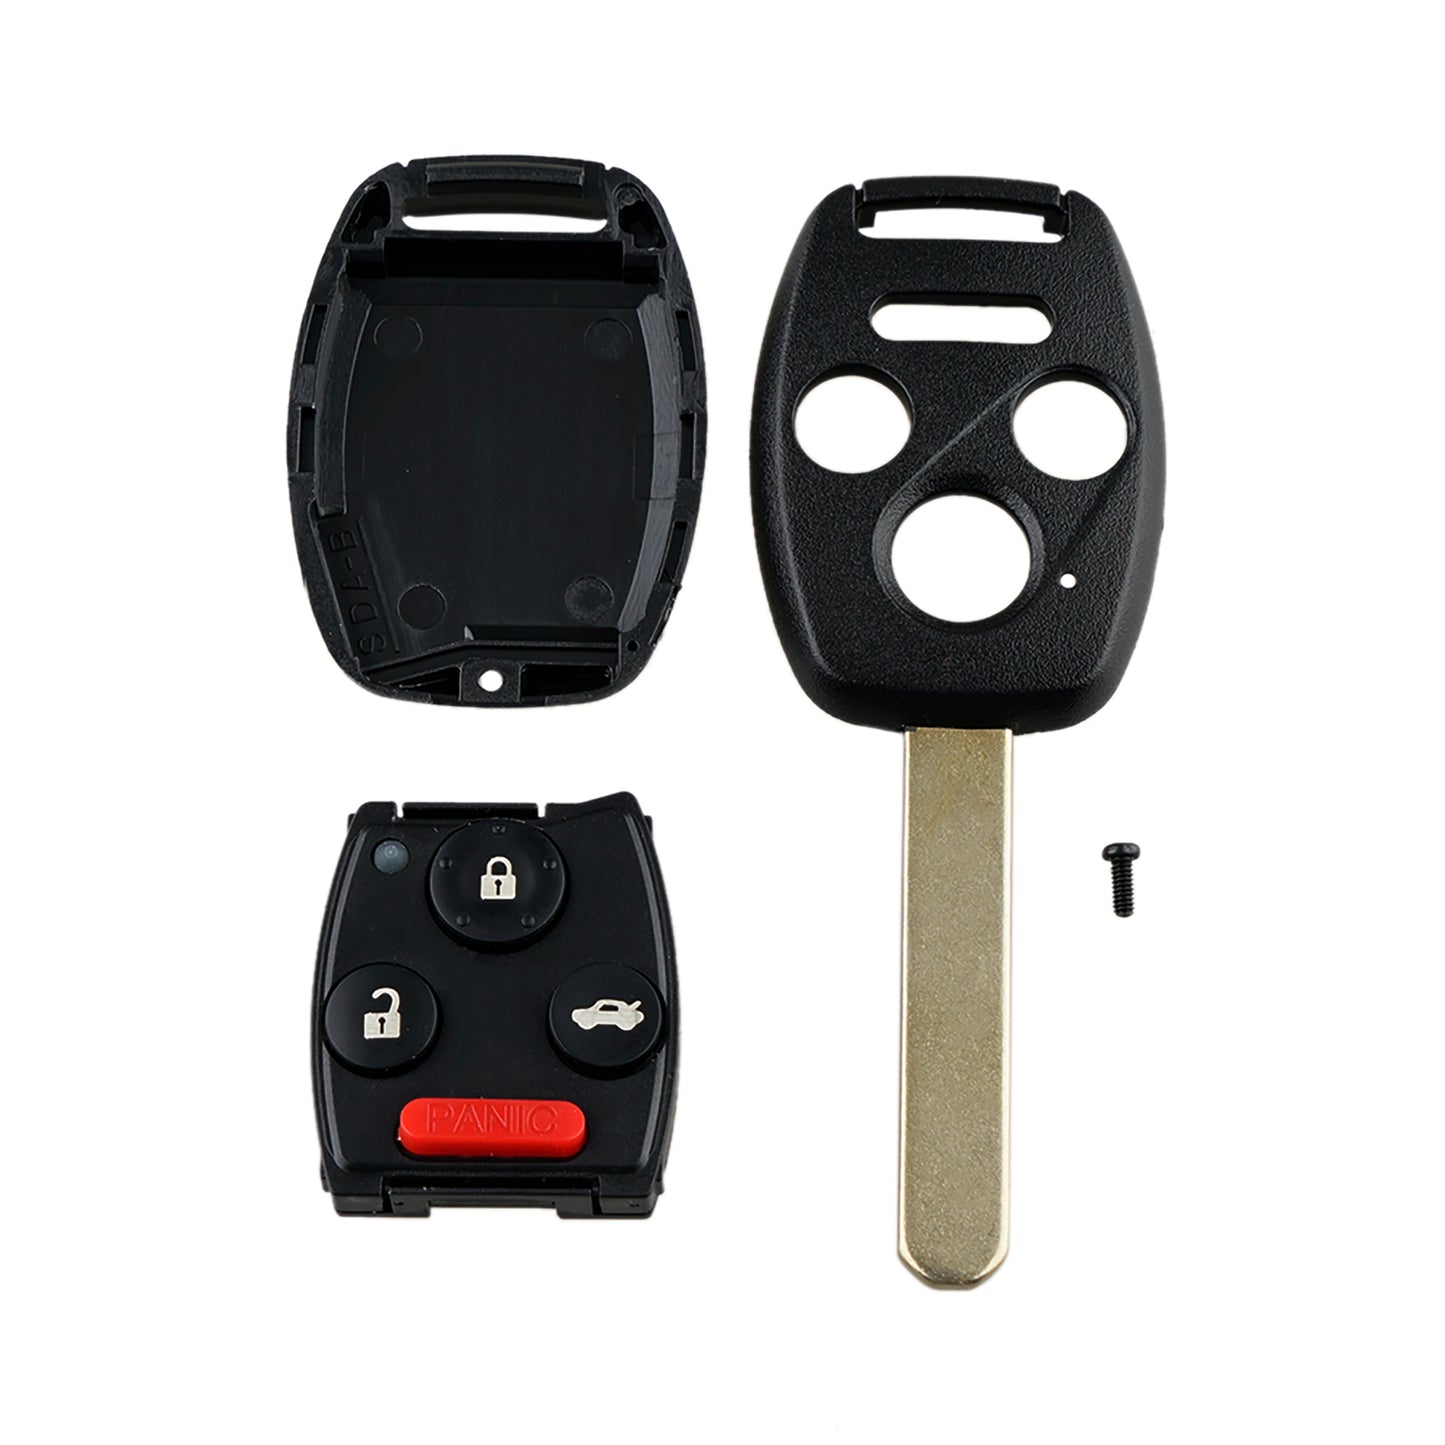 3+1 Buttons 313.8MHz Keyless Entry Fob Remote Car Key For 2006 - 2013 Honda Civic MDX FCC ID: N5F-S0084A N5F-A05TAA SKU : J048